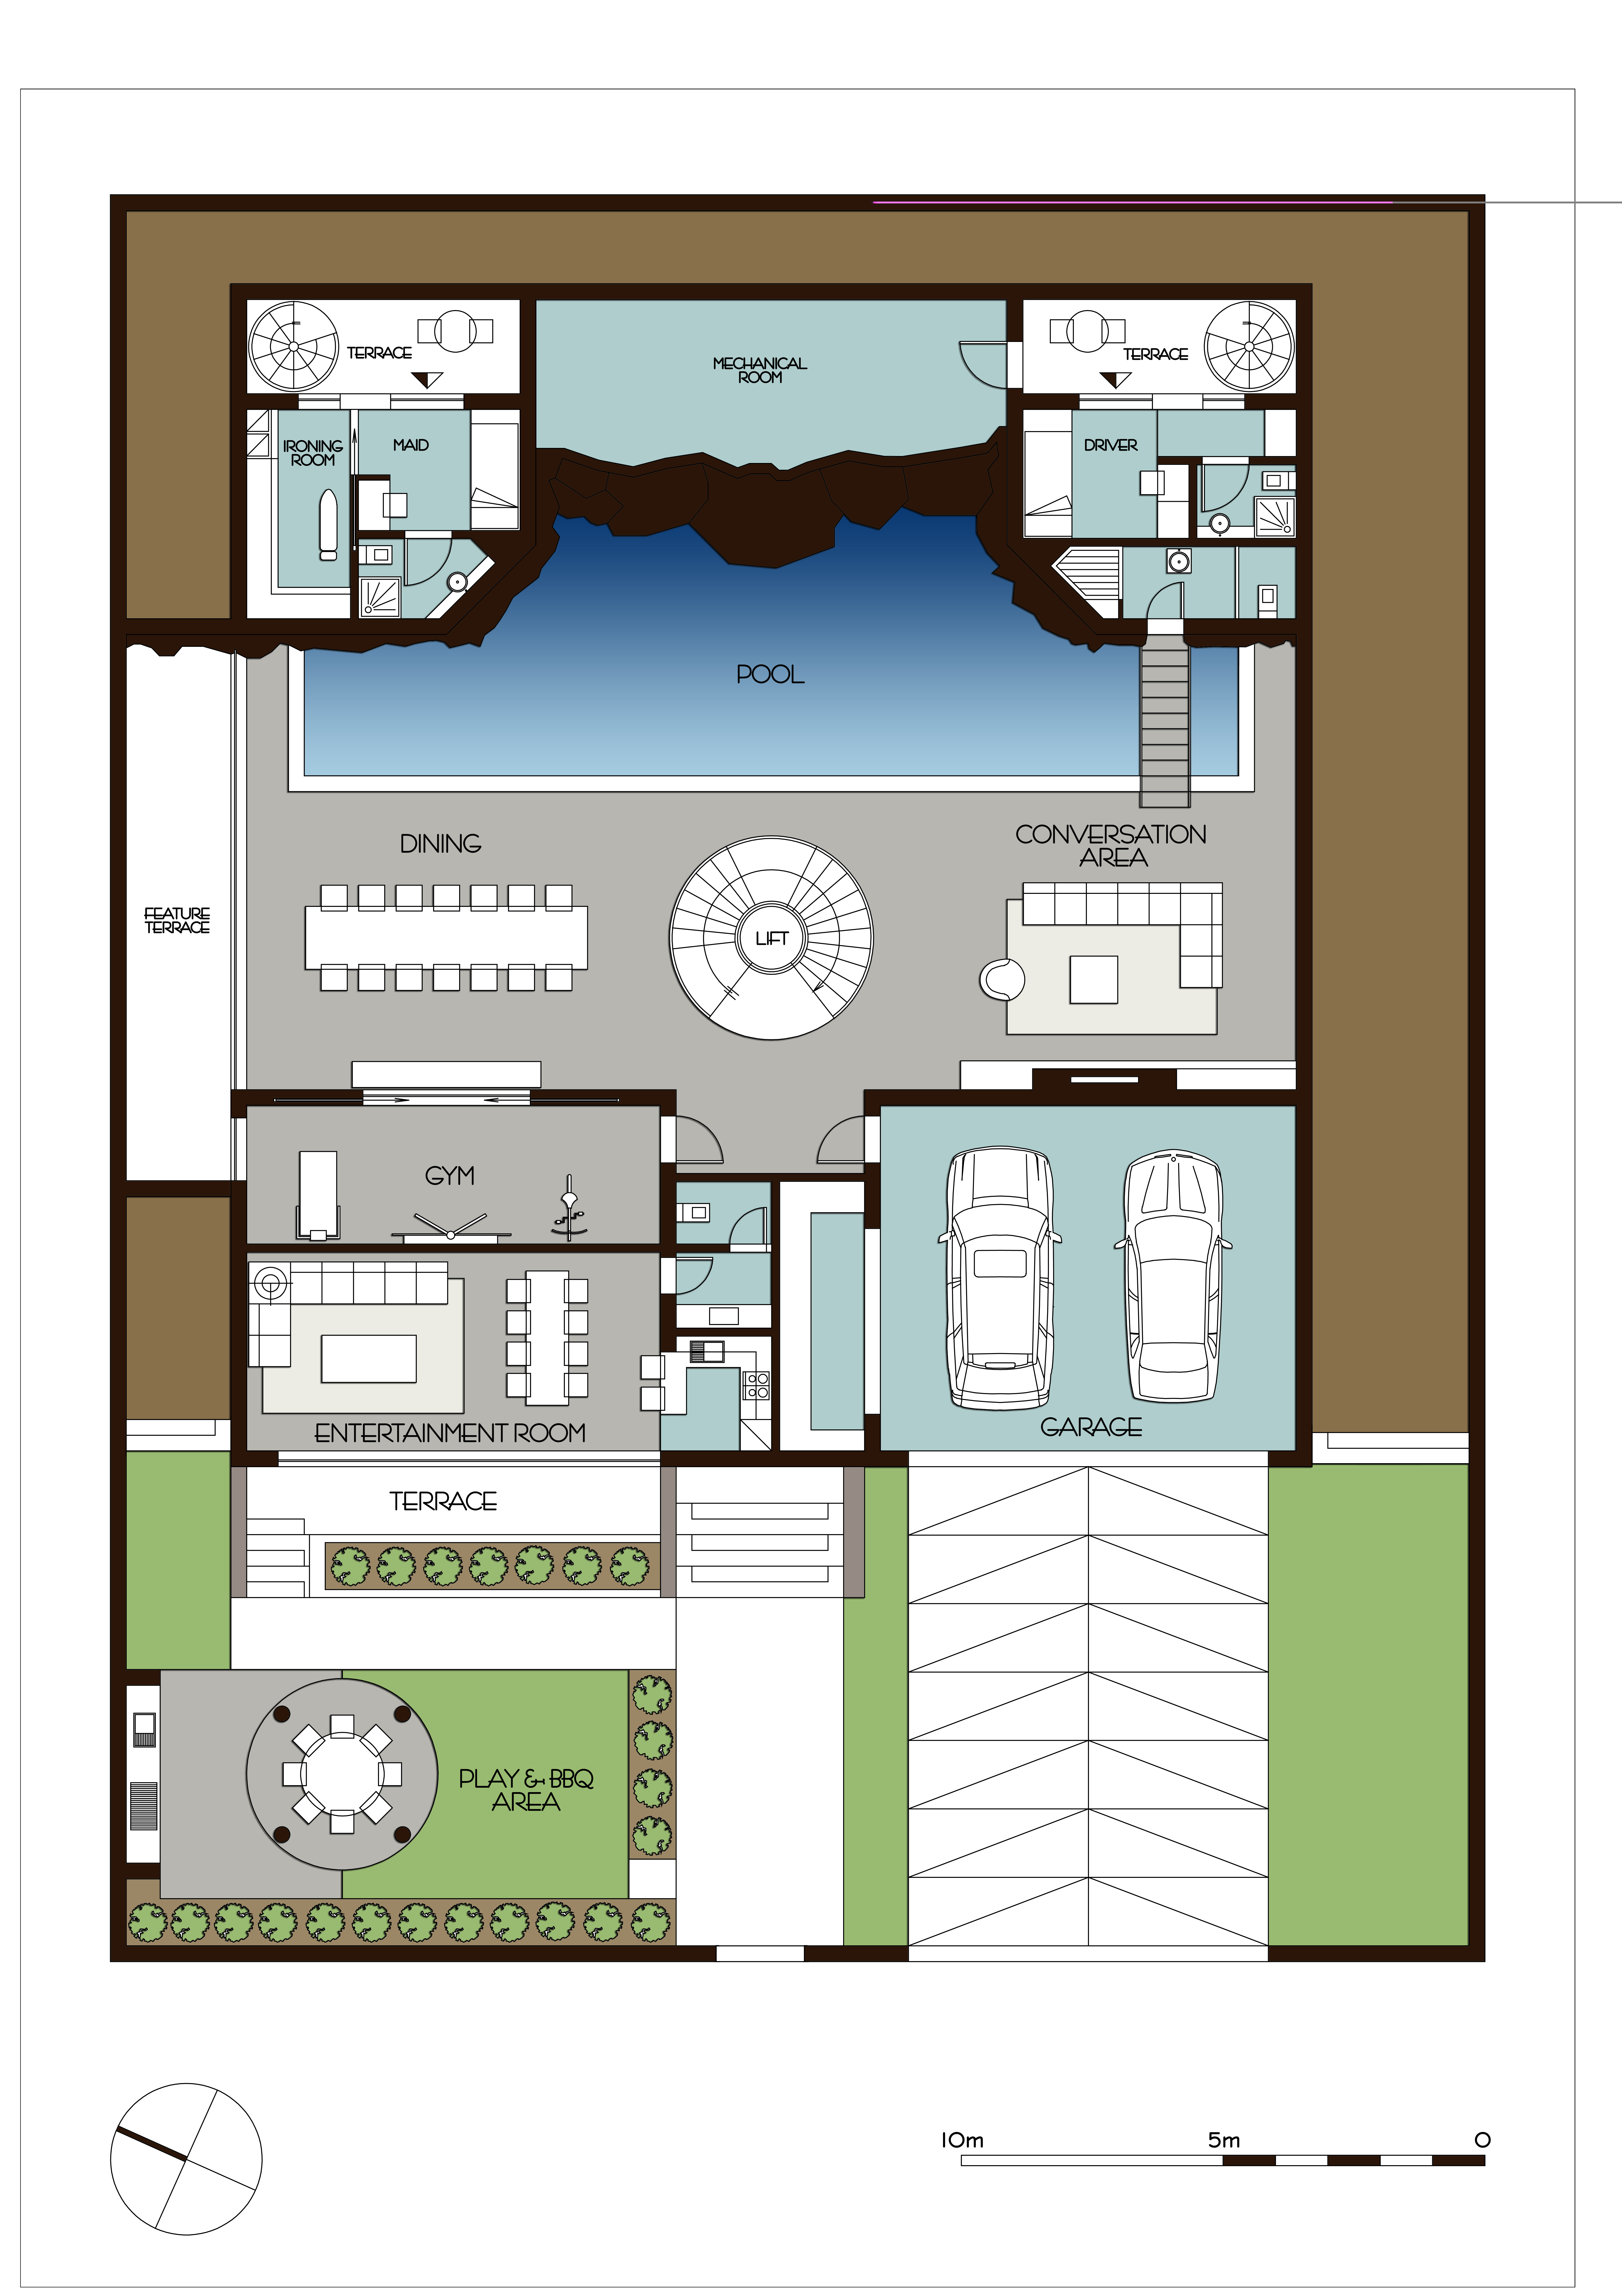 Architecture and floor plans